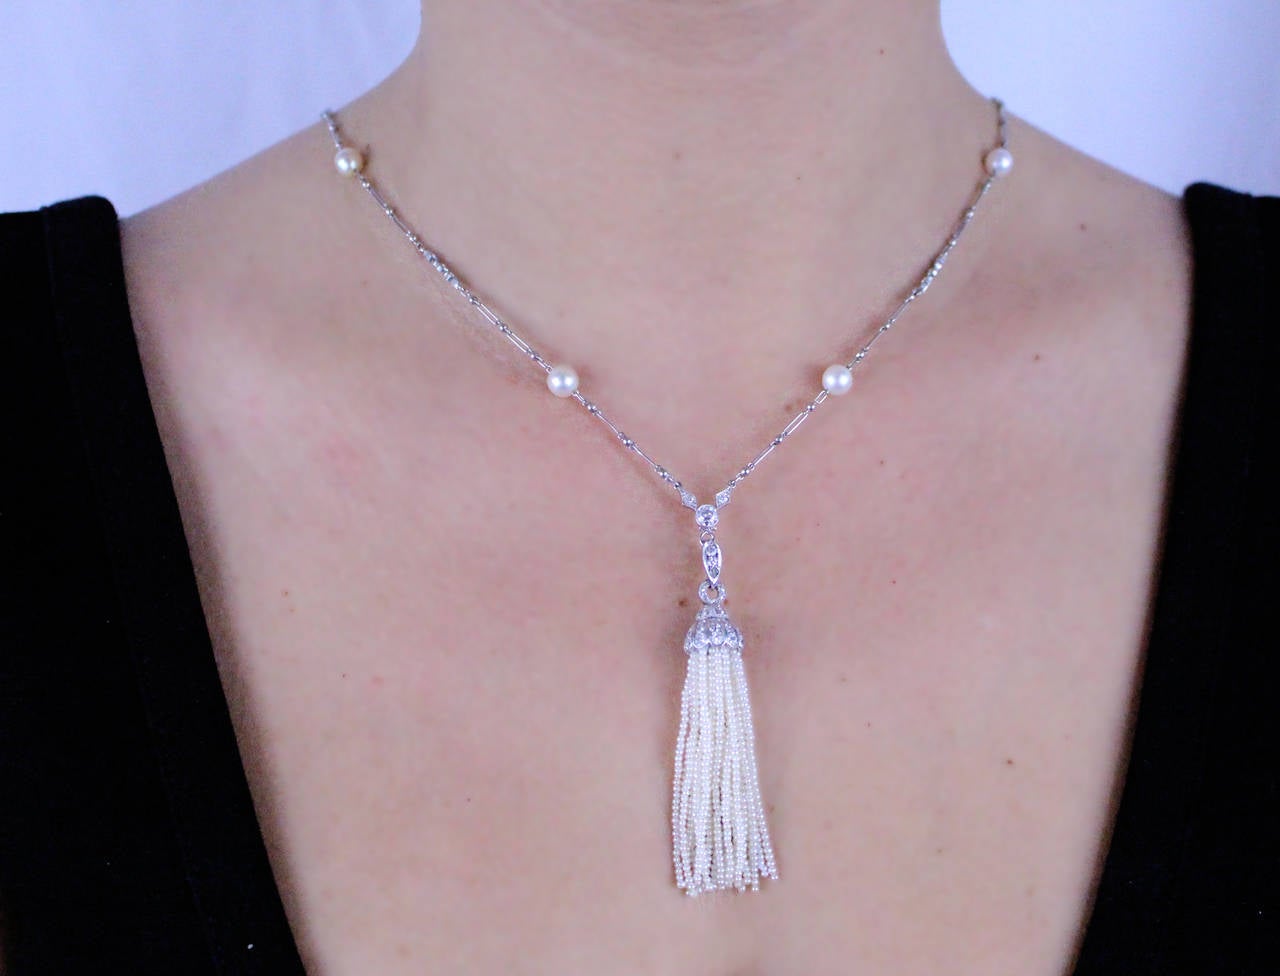 Platinum necklace with 6 diamond sections weighing approximately 1 carat, and 12 cultured pearls measuring 5 1/2mm. Removable natural seed pearl tassel set with old mine diamonds. 
Necklace is 30